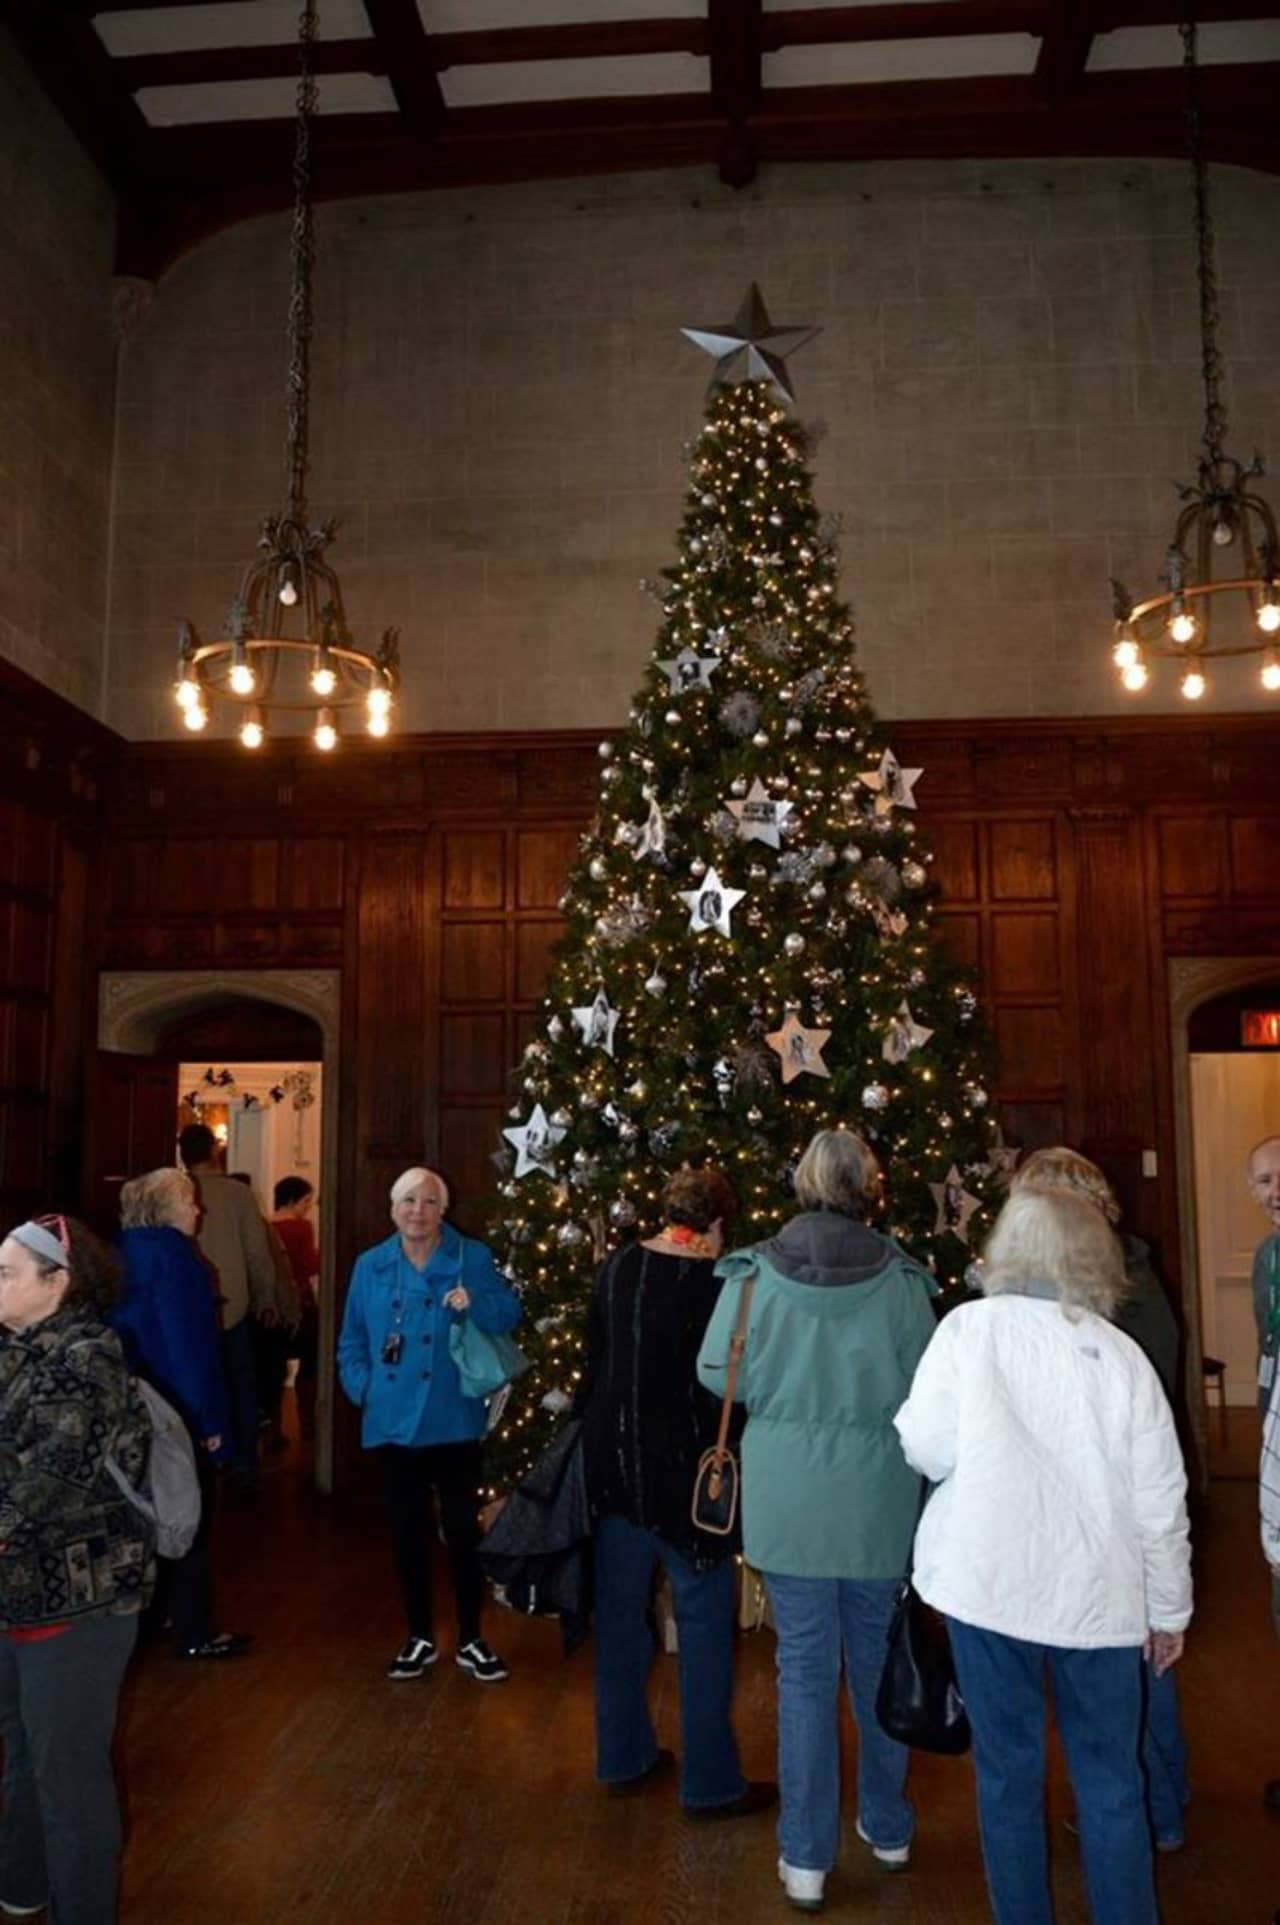 Ringwood Manor will host its 40th annual Victorian Christmas event Dec. 12-13.